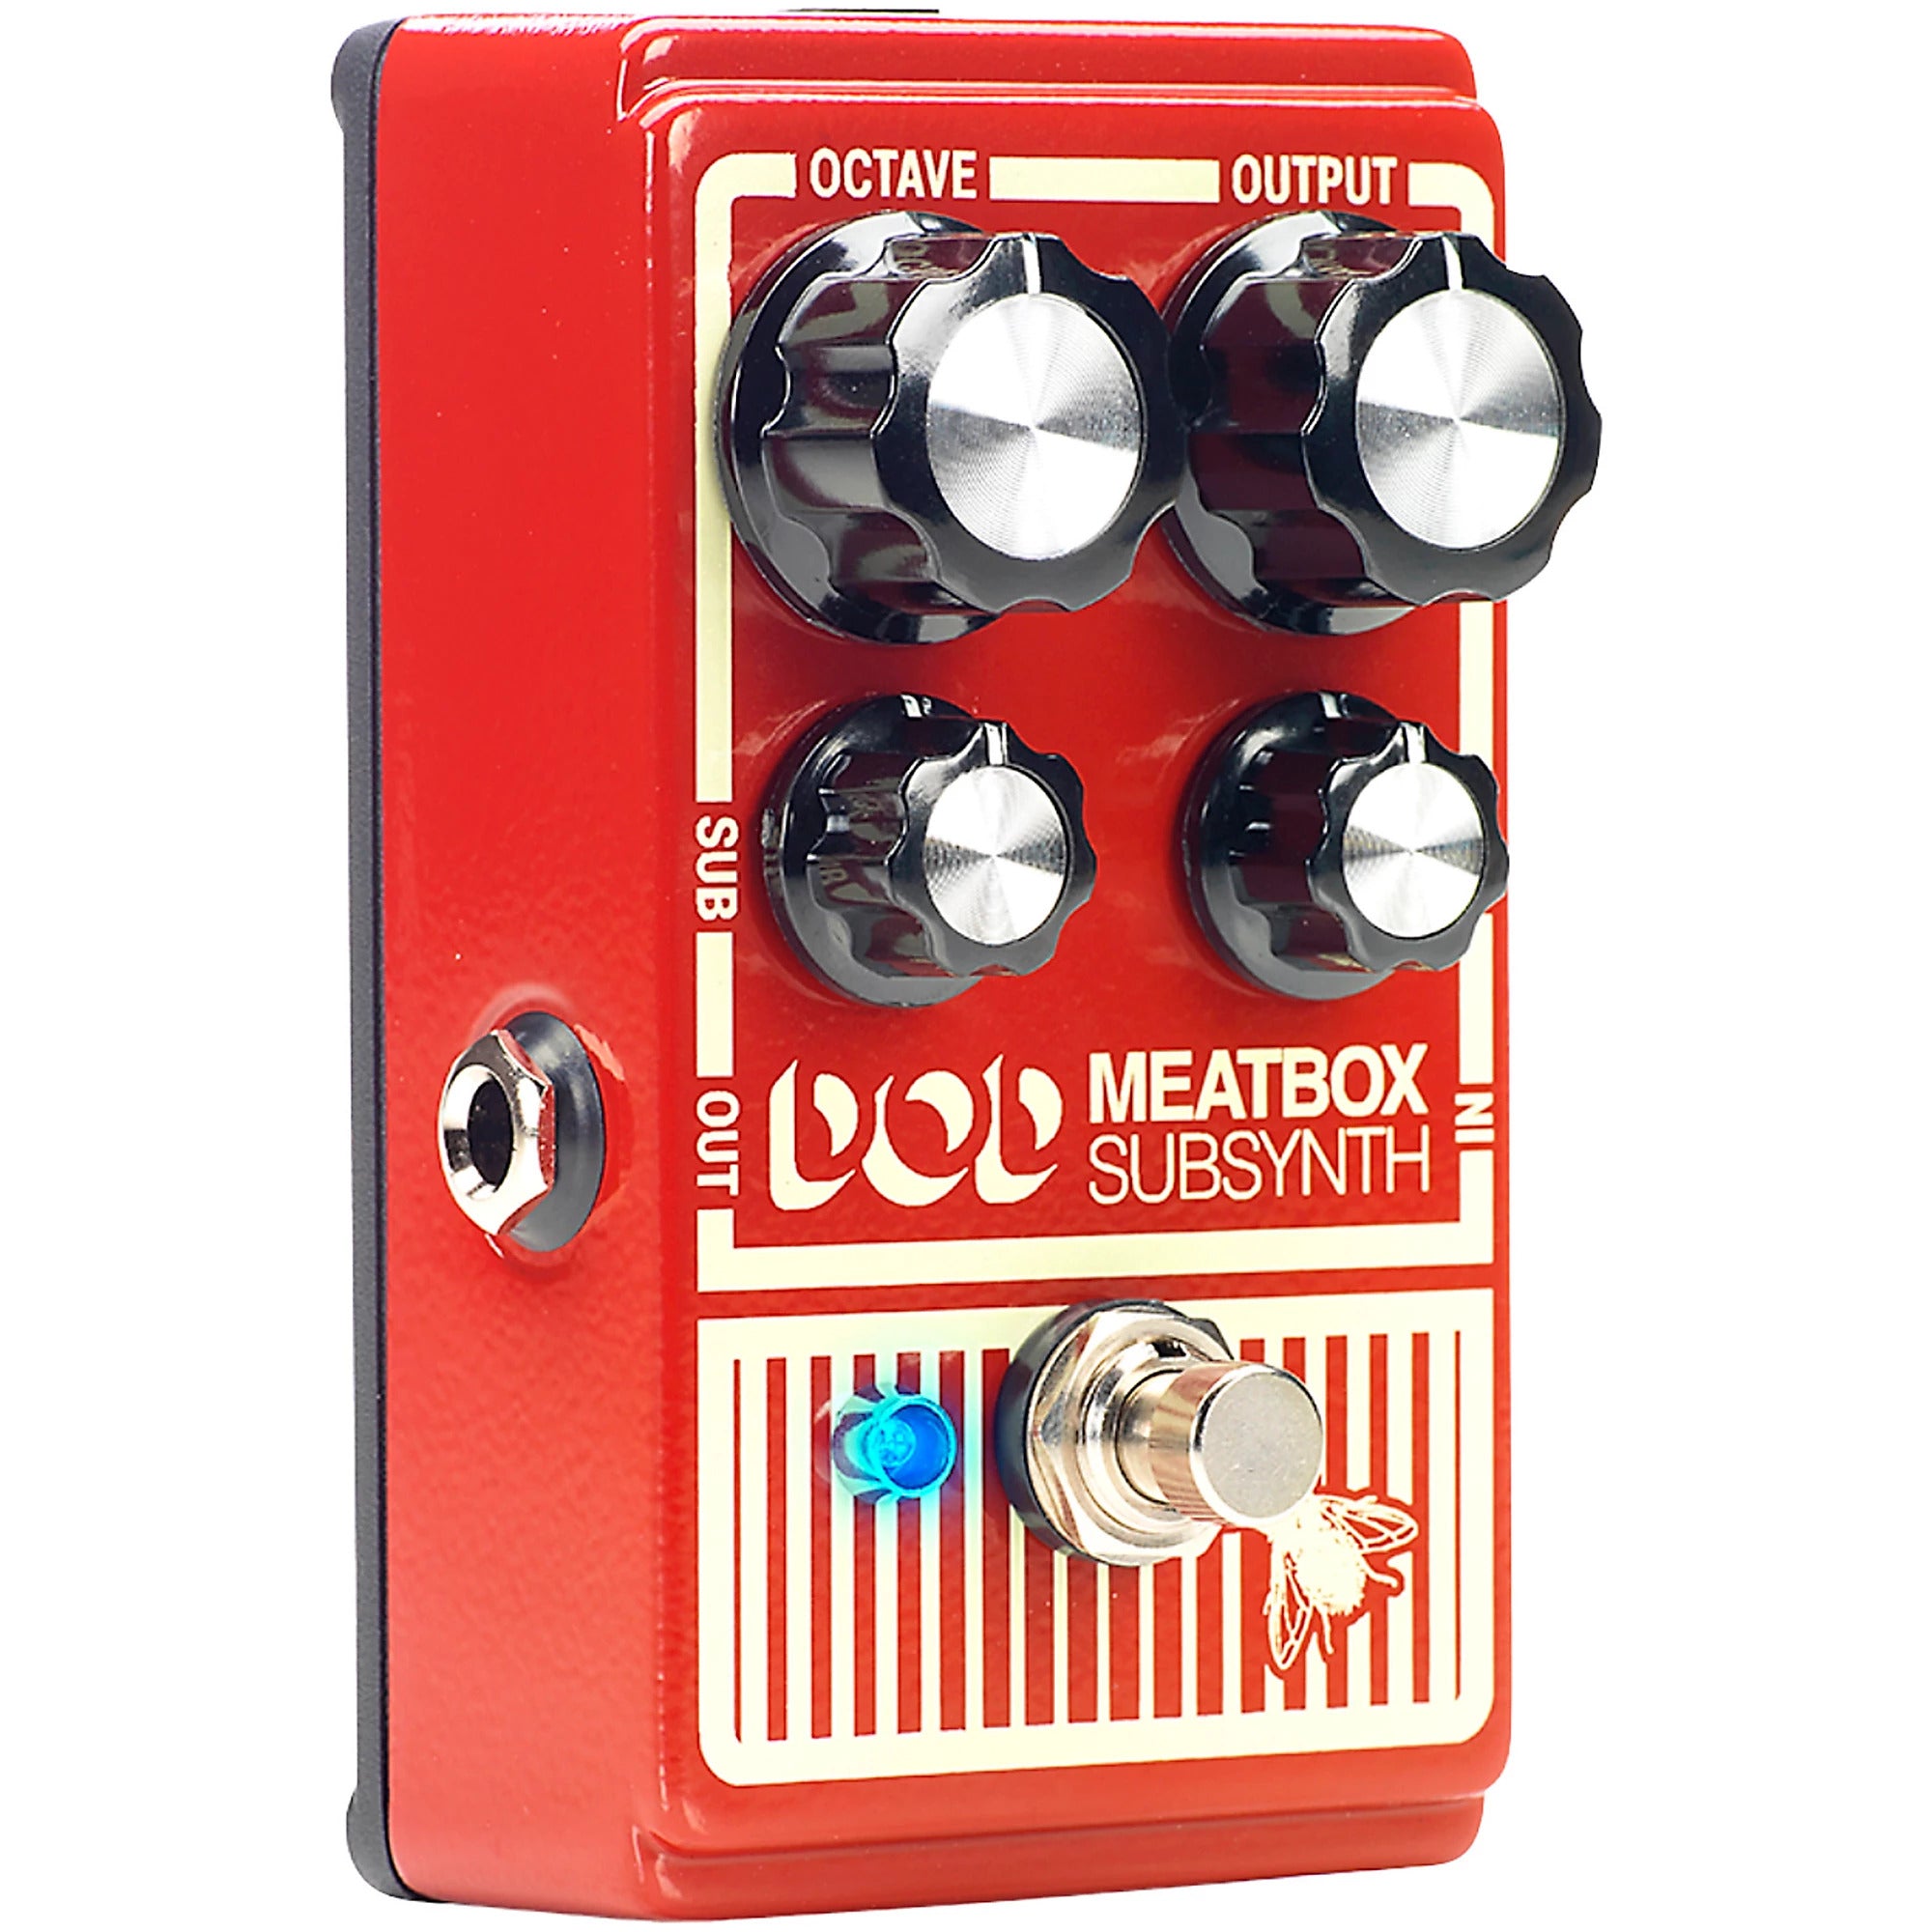 DOD MEATBOX OCTAVE SUBHARMONIC SUB SYNTH PEDAL